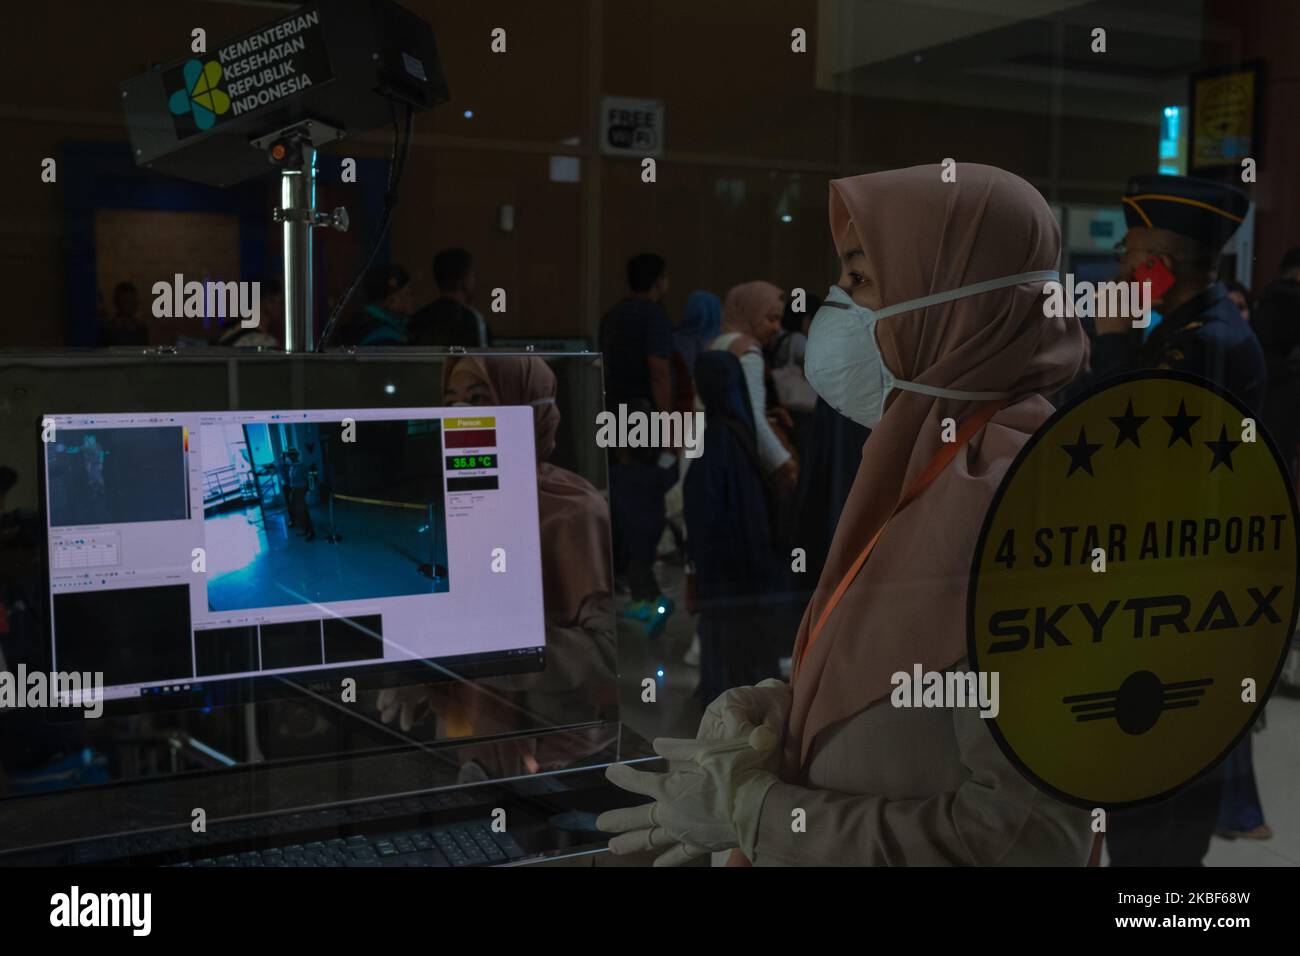 A health worker monitors a thermal scanner as passengers arrive at Sultan Syarif Kasim II airport on January 23, 2020 in Pekanbaru, Indonesia. A new virus that has killed nine people, infected hundreds and already reached the United States could mutate and spread, China warned January 21, as authorities scrambled to contain the disease during the Lunar New Year travel season. (Photo by Afrianto Silalahi/NurPhoto) Stock Photo